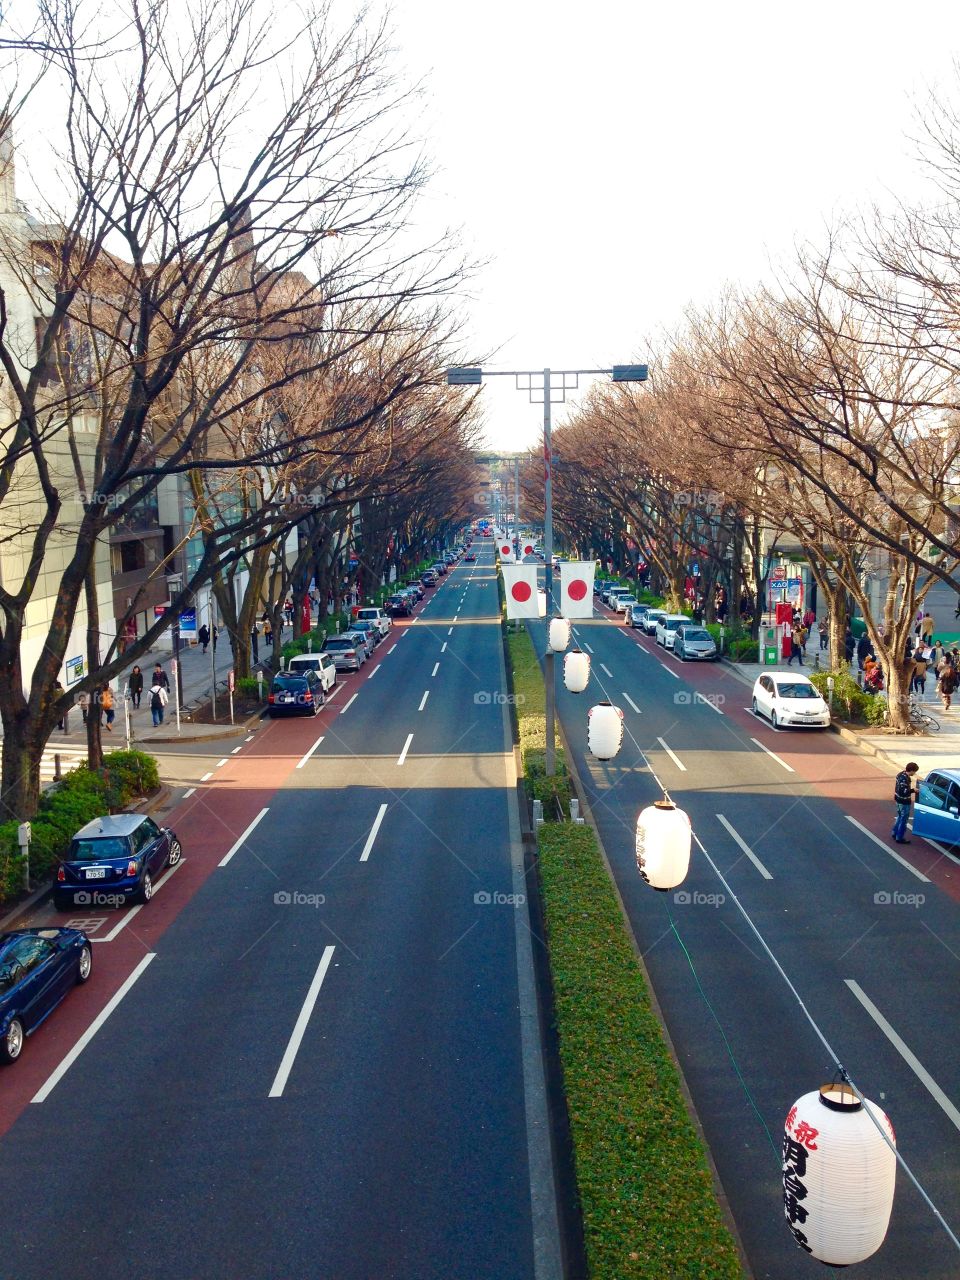 Omotesando. First time in Tokyo. Been there on Dec 31, 2013.